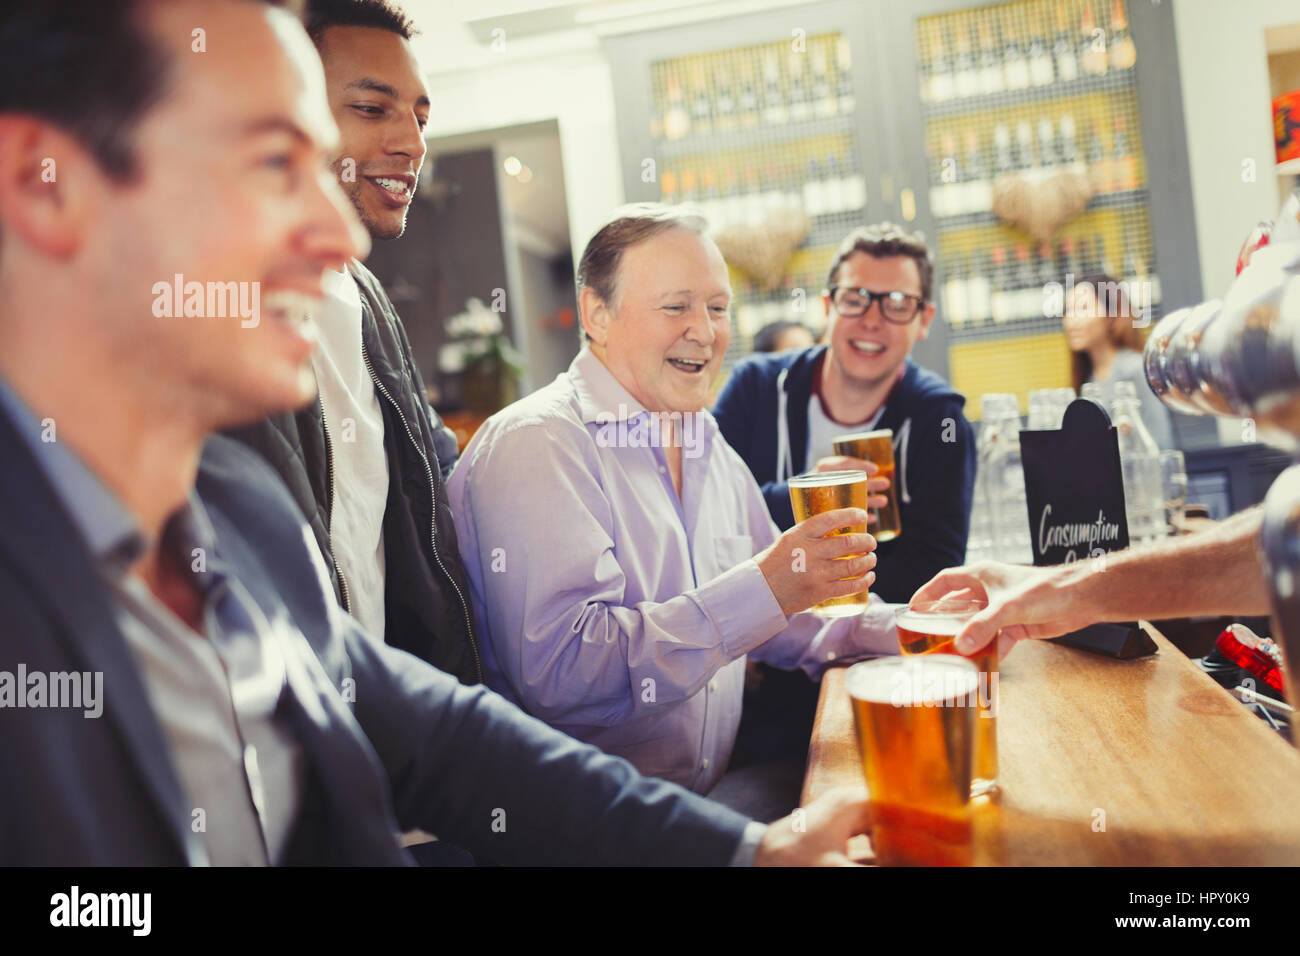 Smiling men friends drinking beer at bar Stock Photo